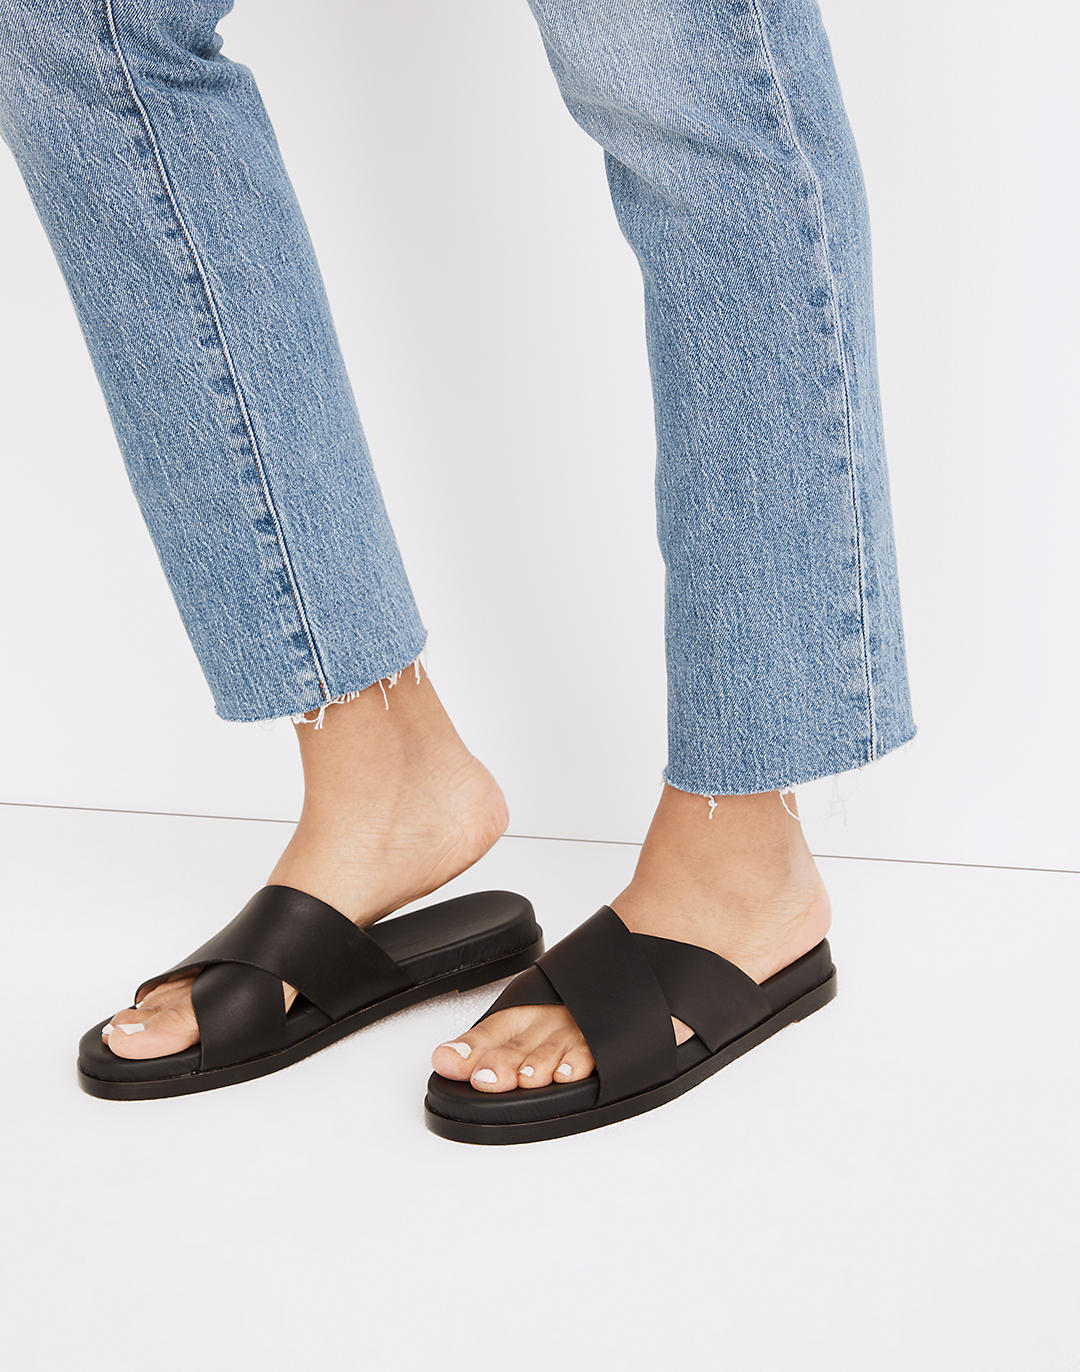 New Madewell The Louisa Mule - recoveryparade-japan.com